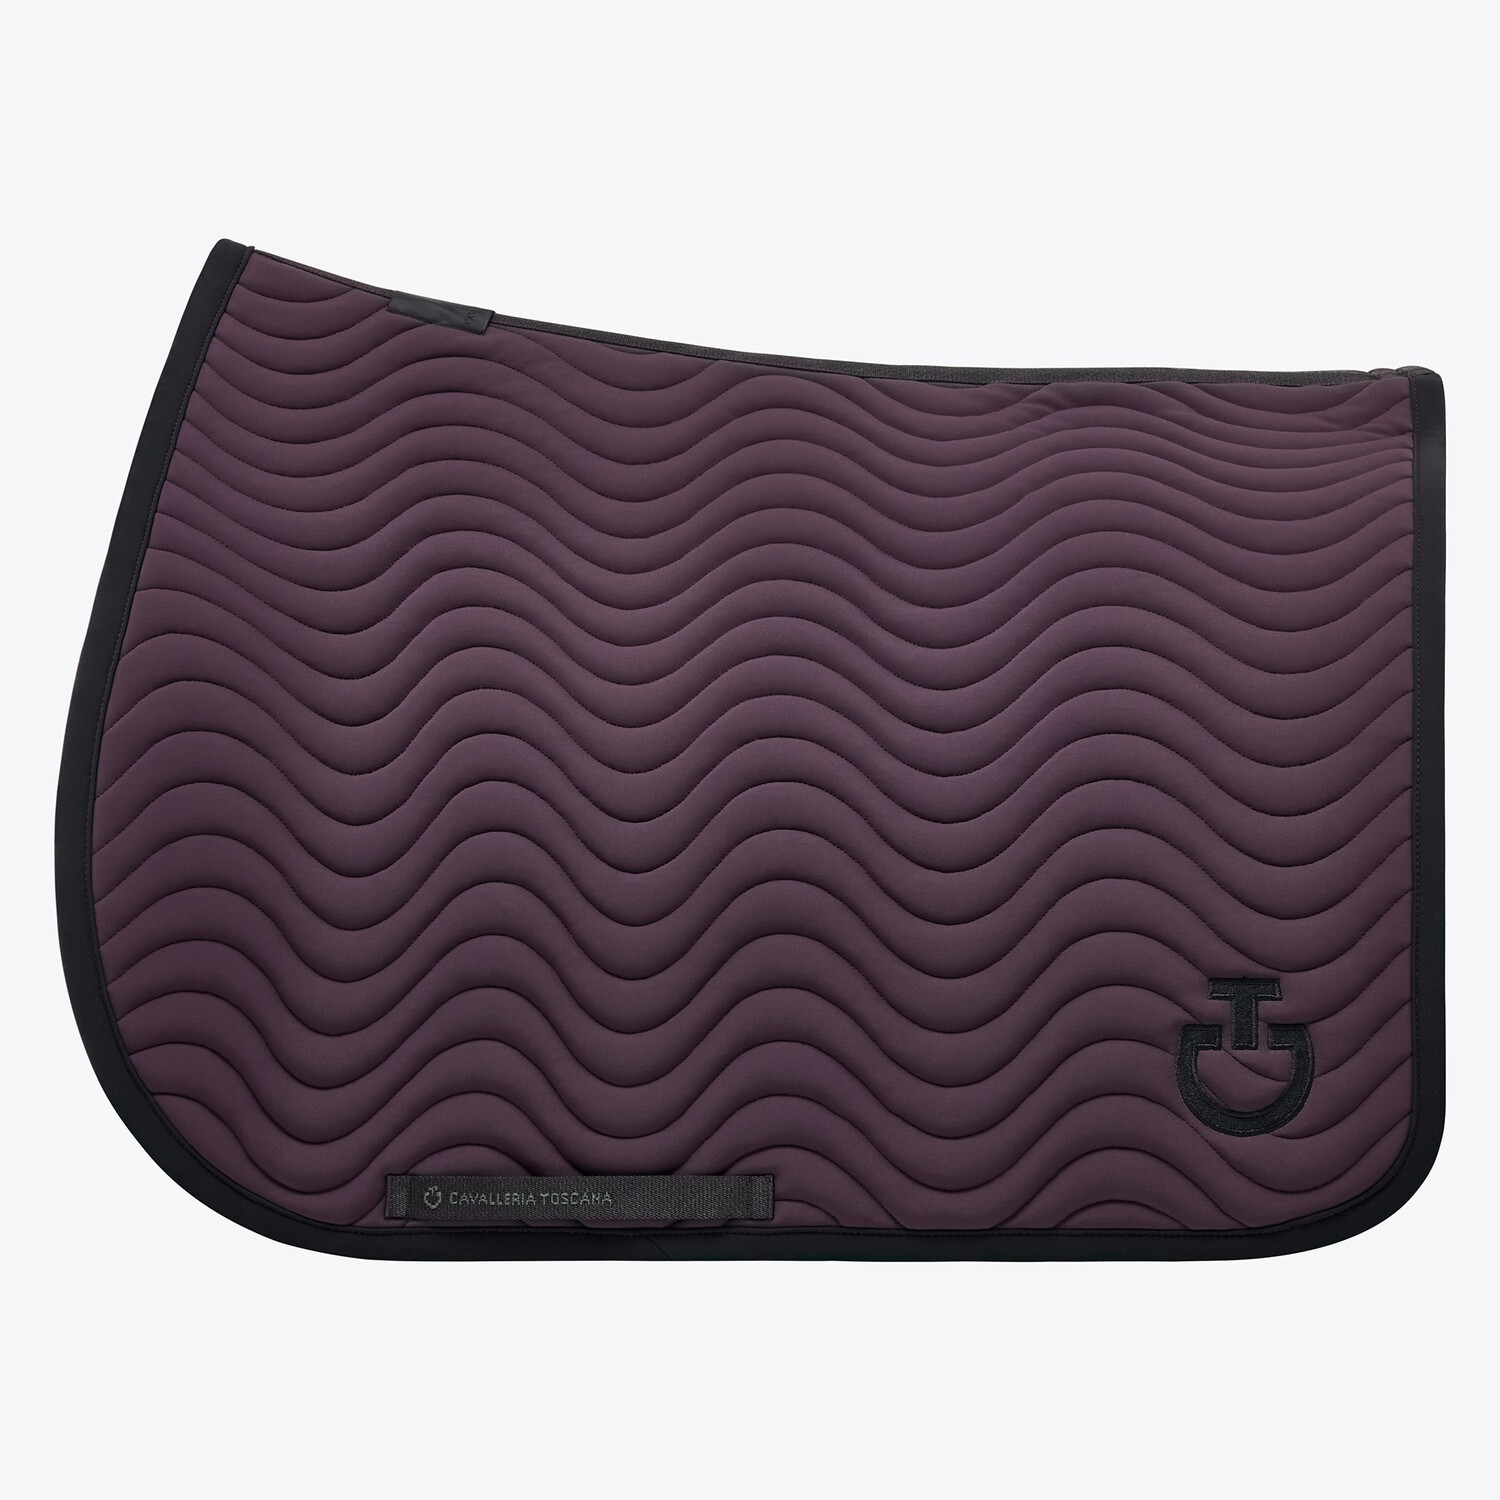 Cavalleria Toscana - Tapis Quilted Wave forme jumping